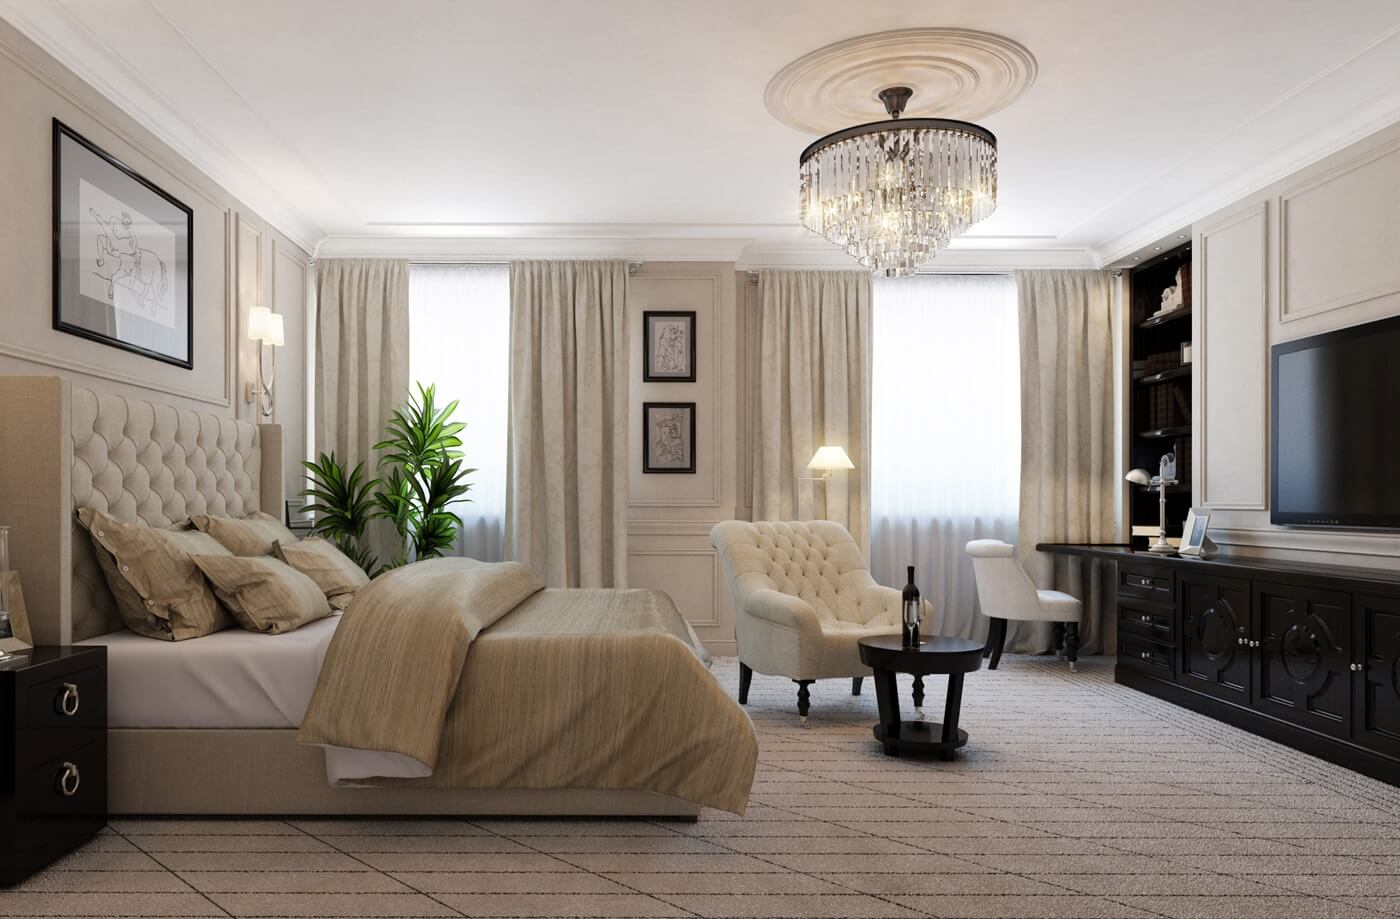 neoclassical style bedroom photo options